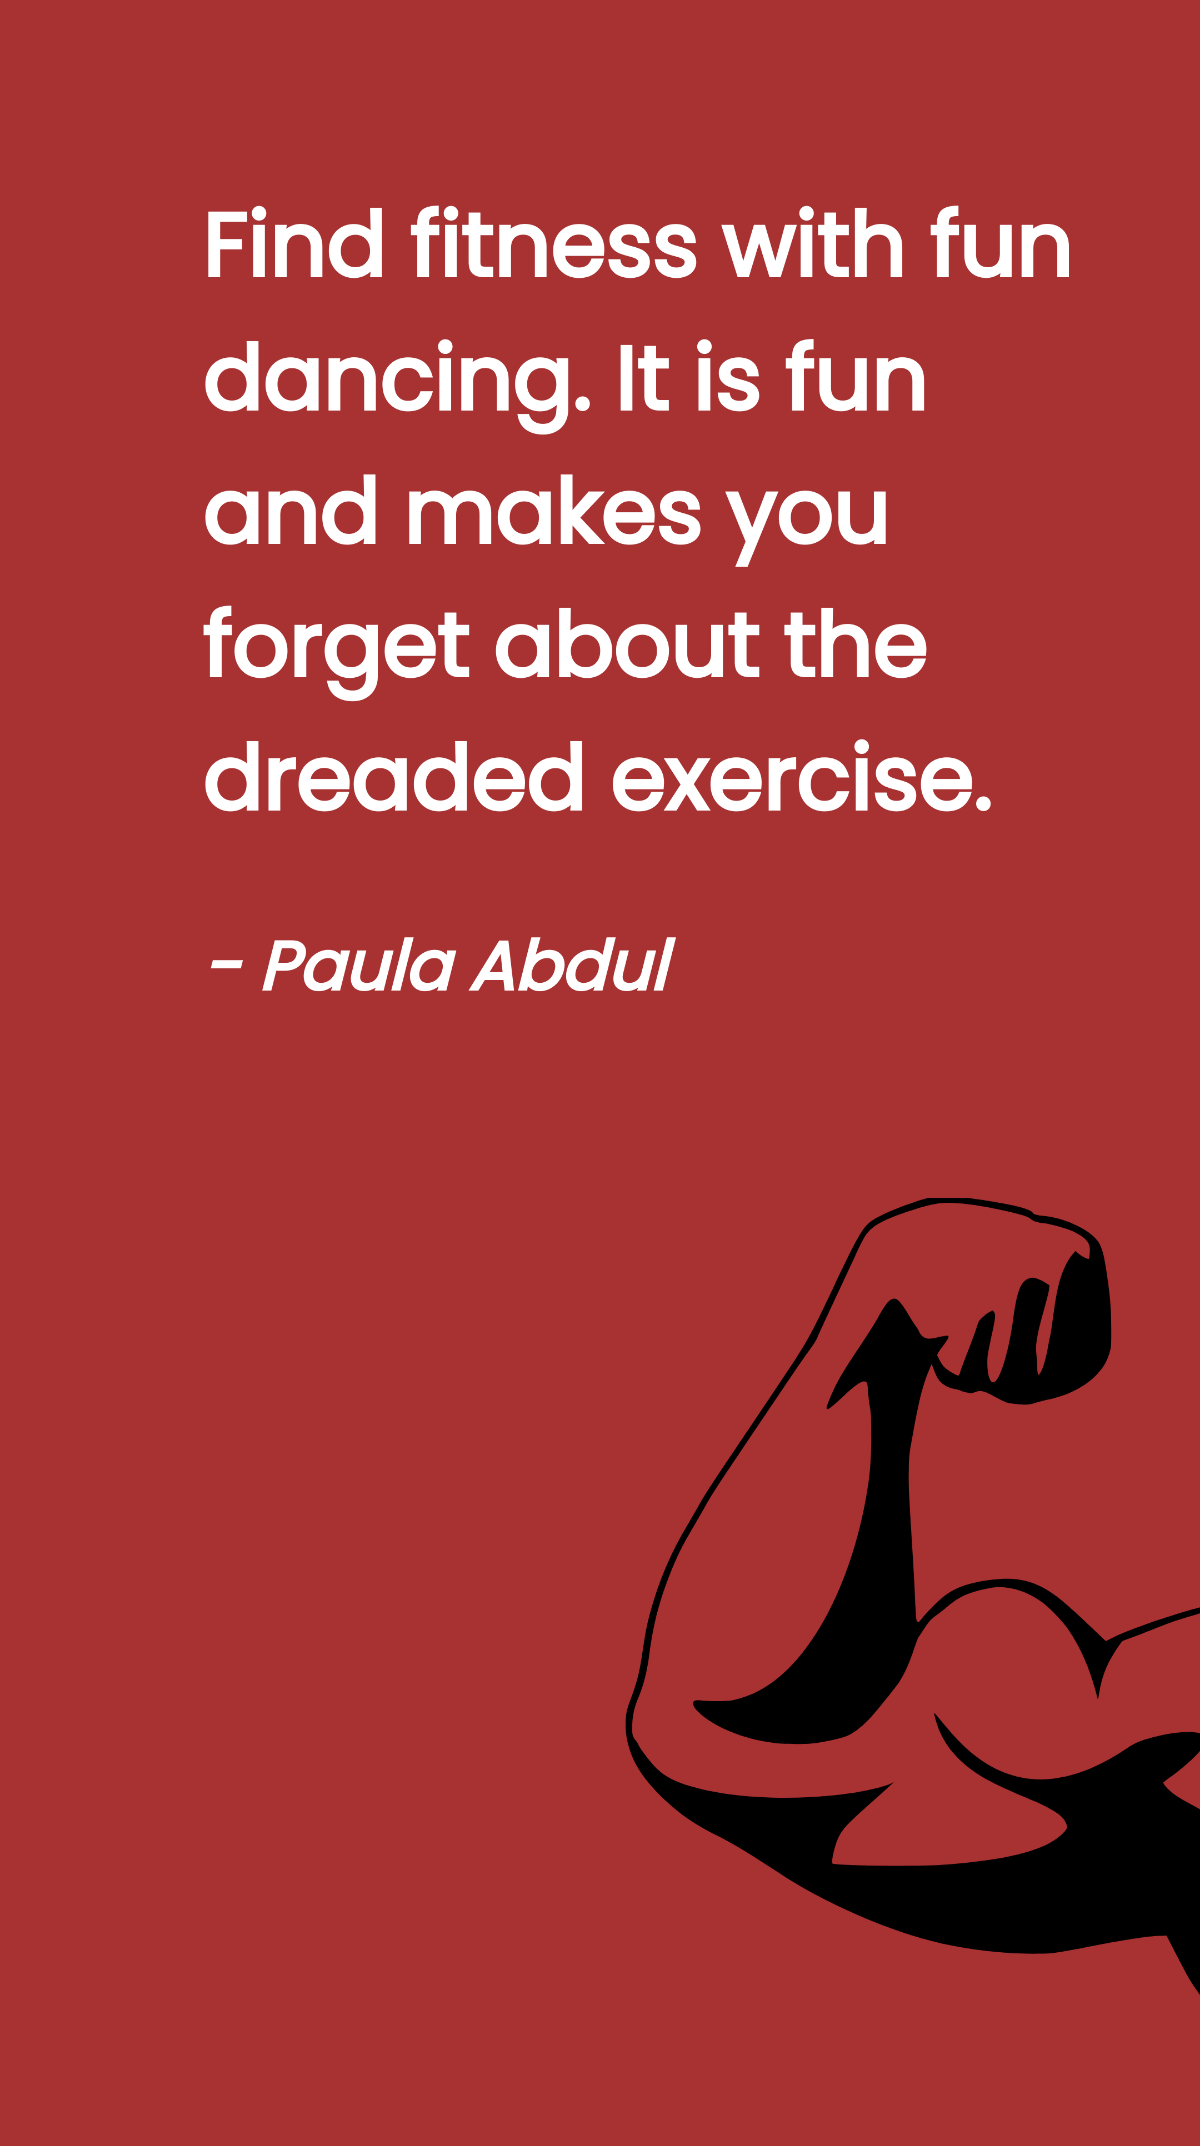 Paula Abdul - Find fitness with fun dancing. It is fun and makes you forget about the dreaded exercise. - Paula Abdul Template